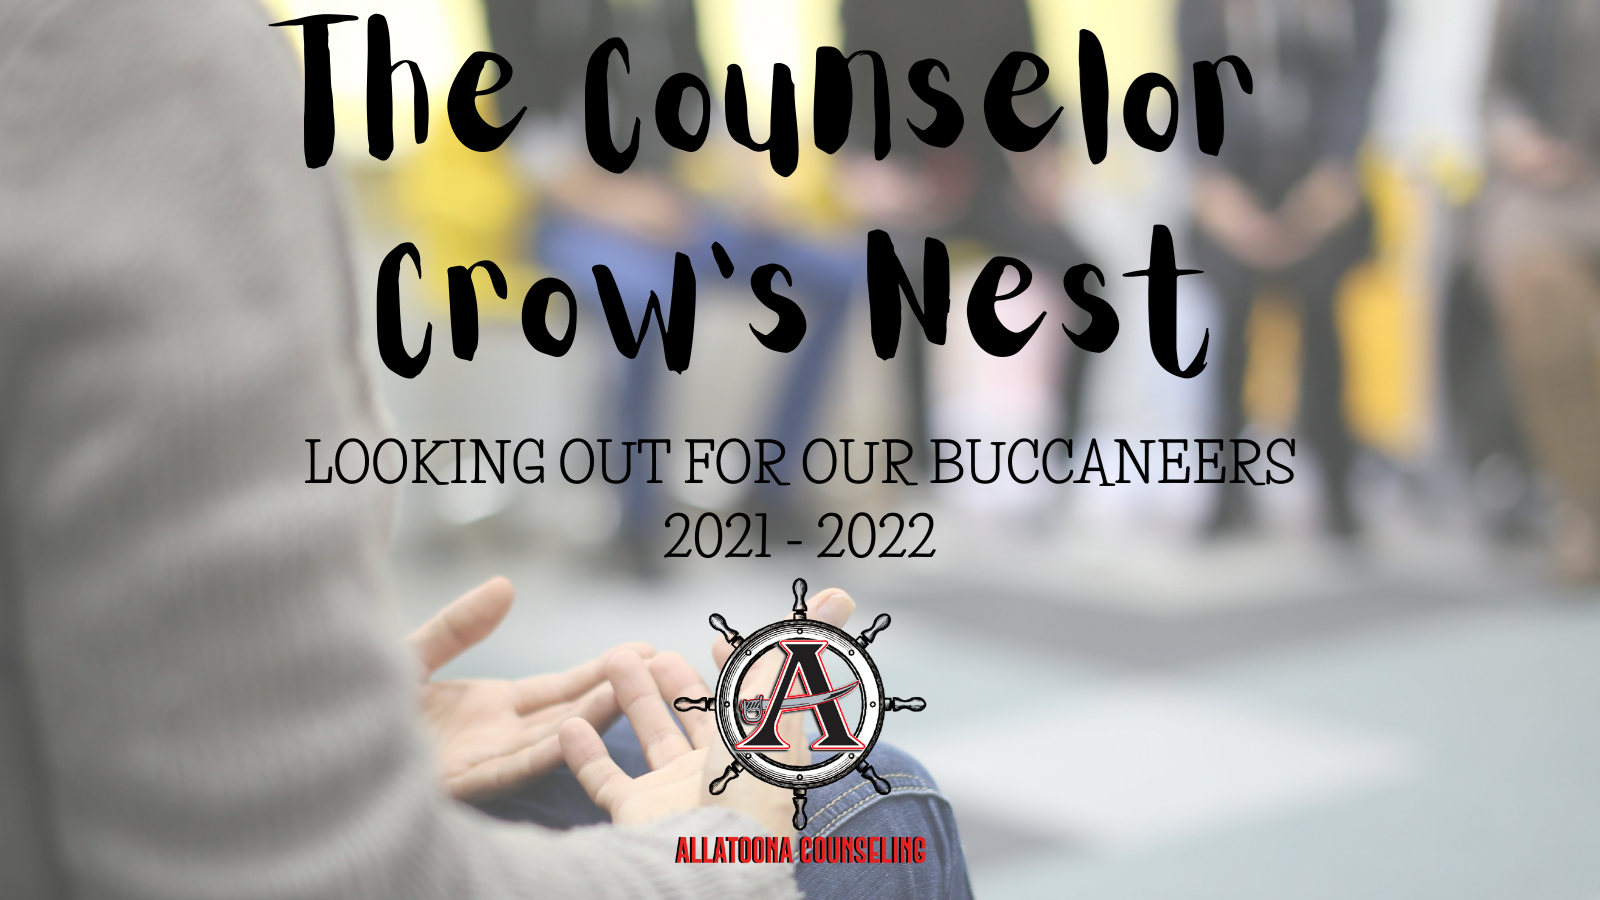 The Counselor's Crow Nest - click to access newsletter